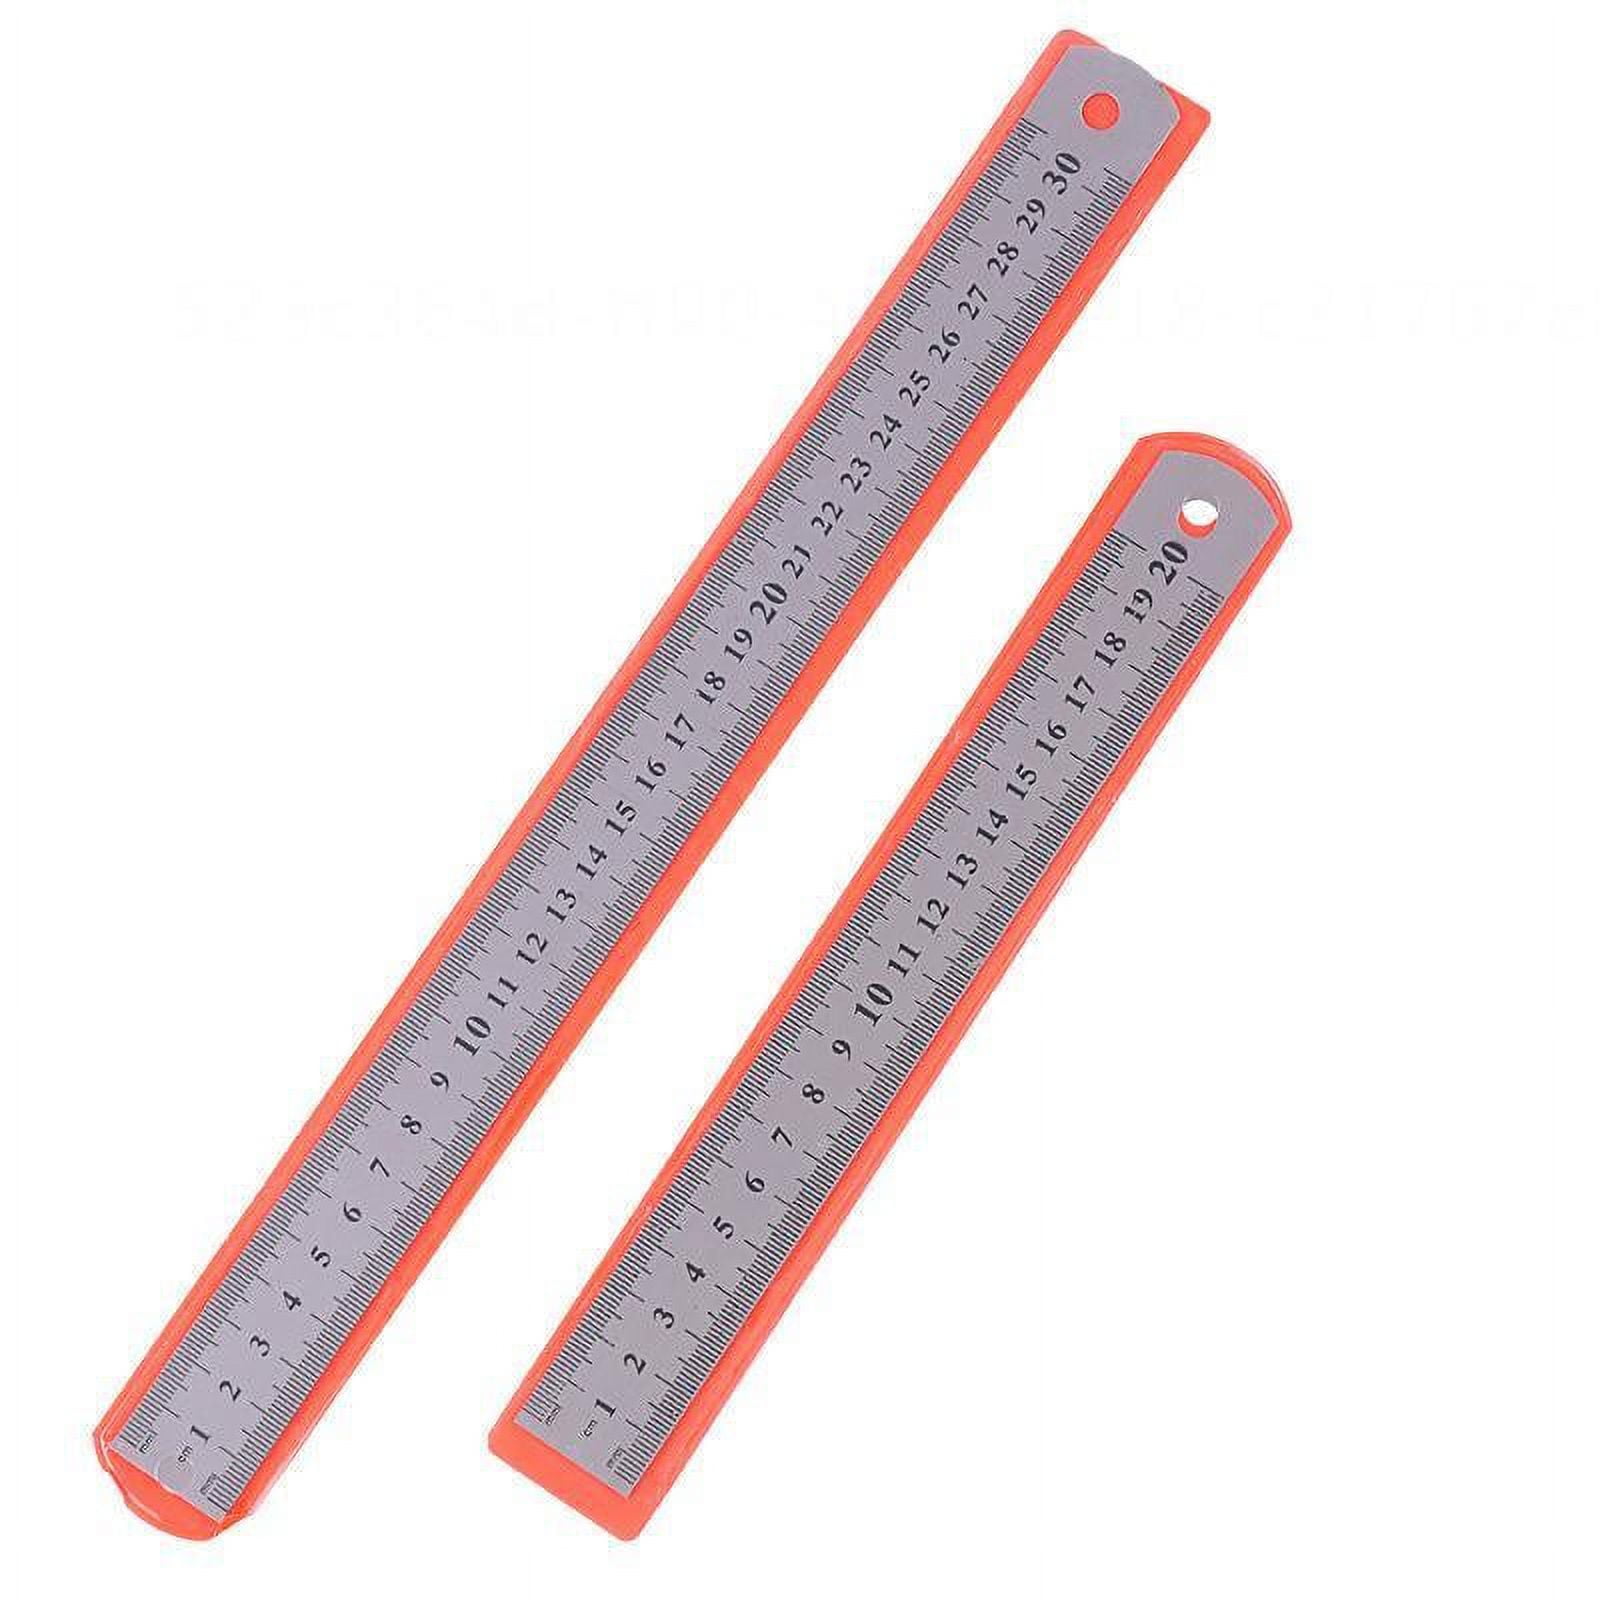 W.A. Portman Stainless Steel Ruler Trio, Imperial and Metric Ruler Set